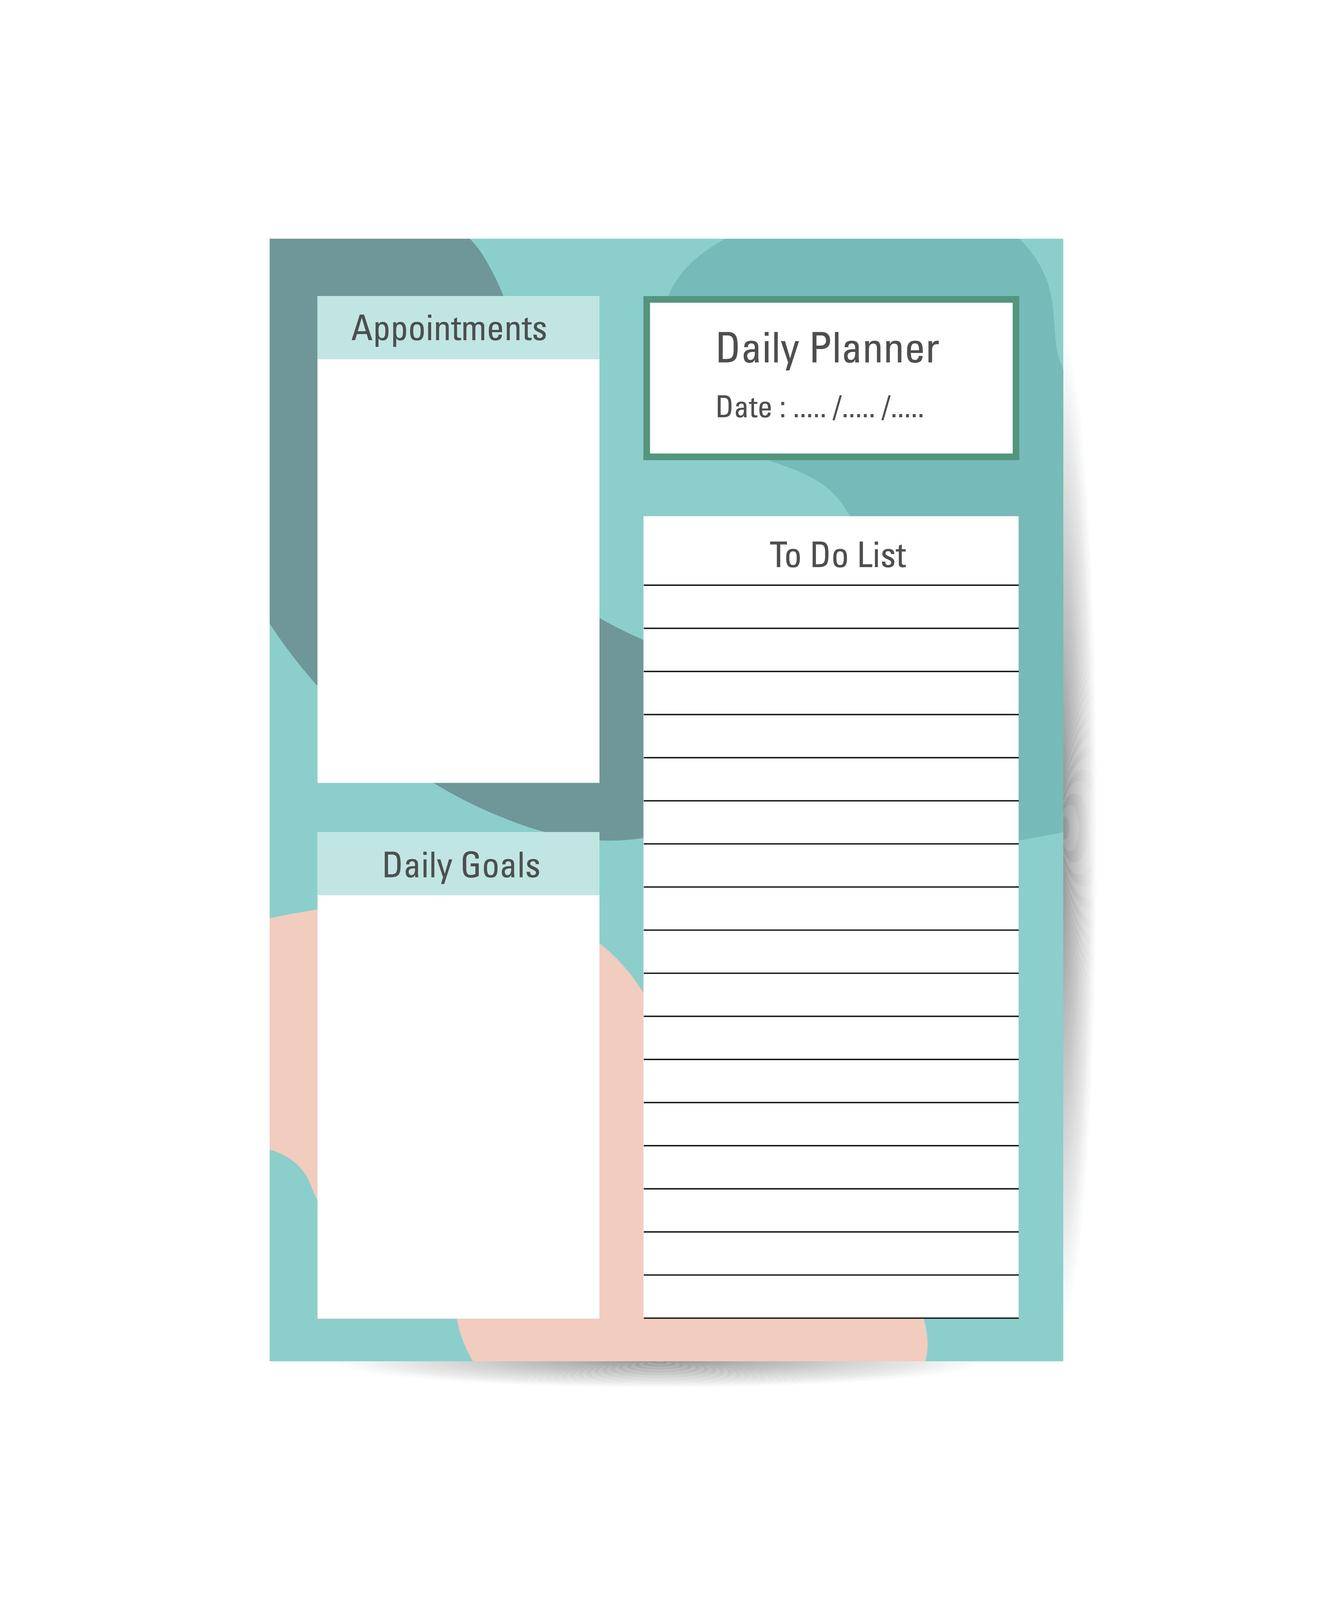 daily plan templates vector design illustration, on colorful background by ANITA